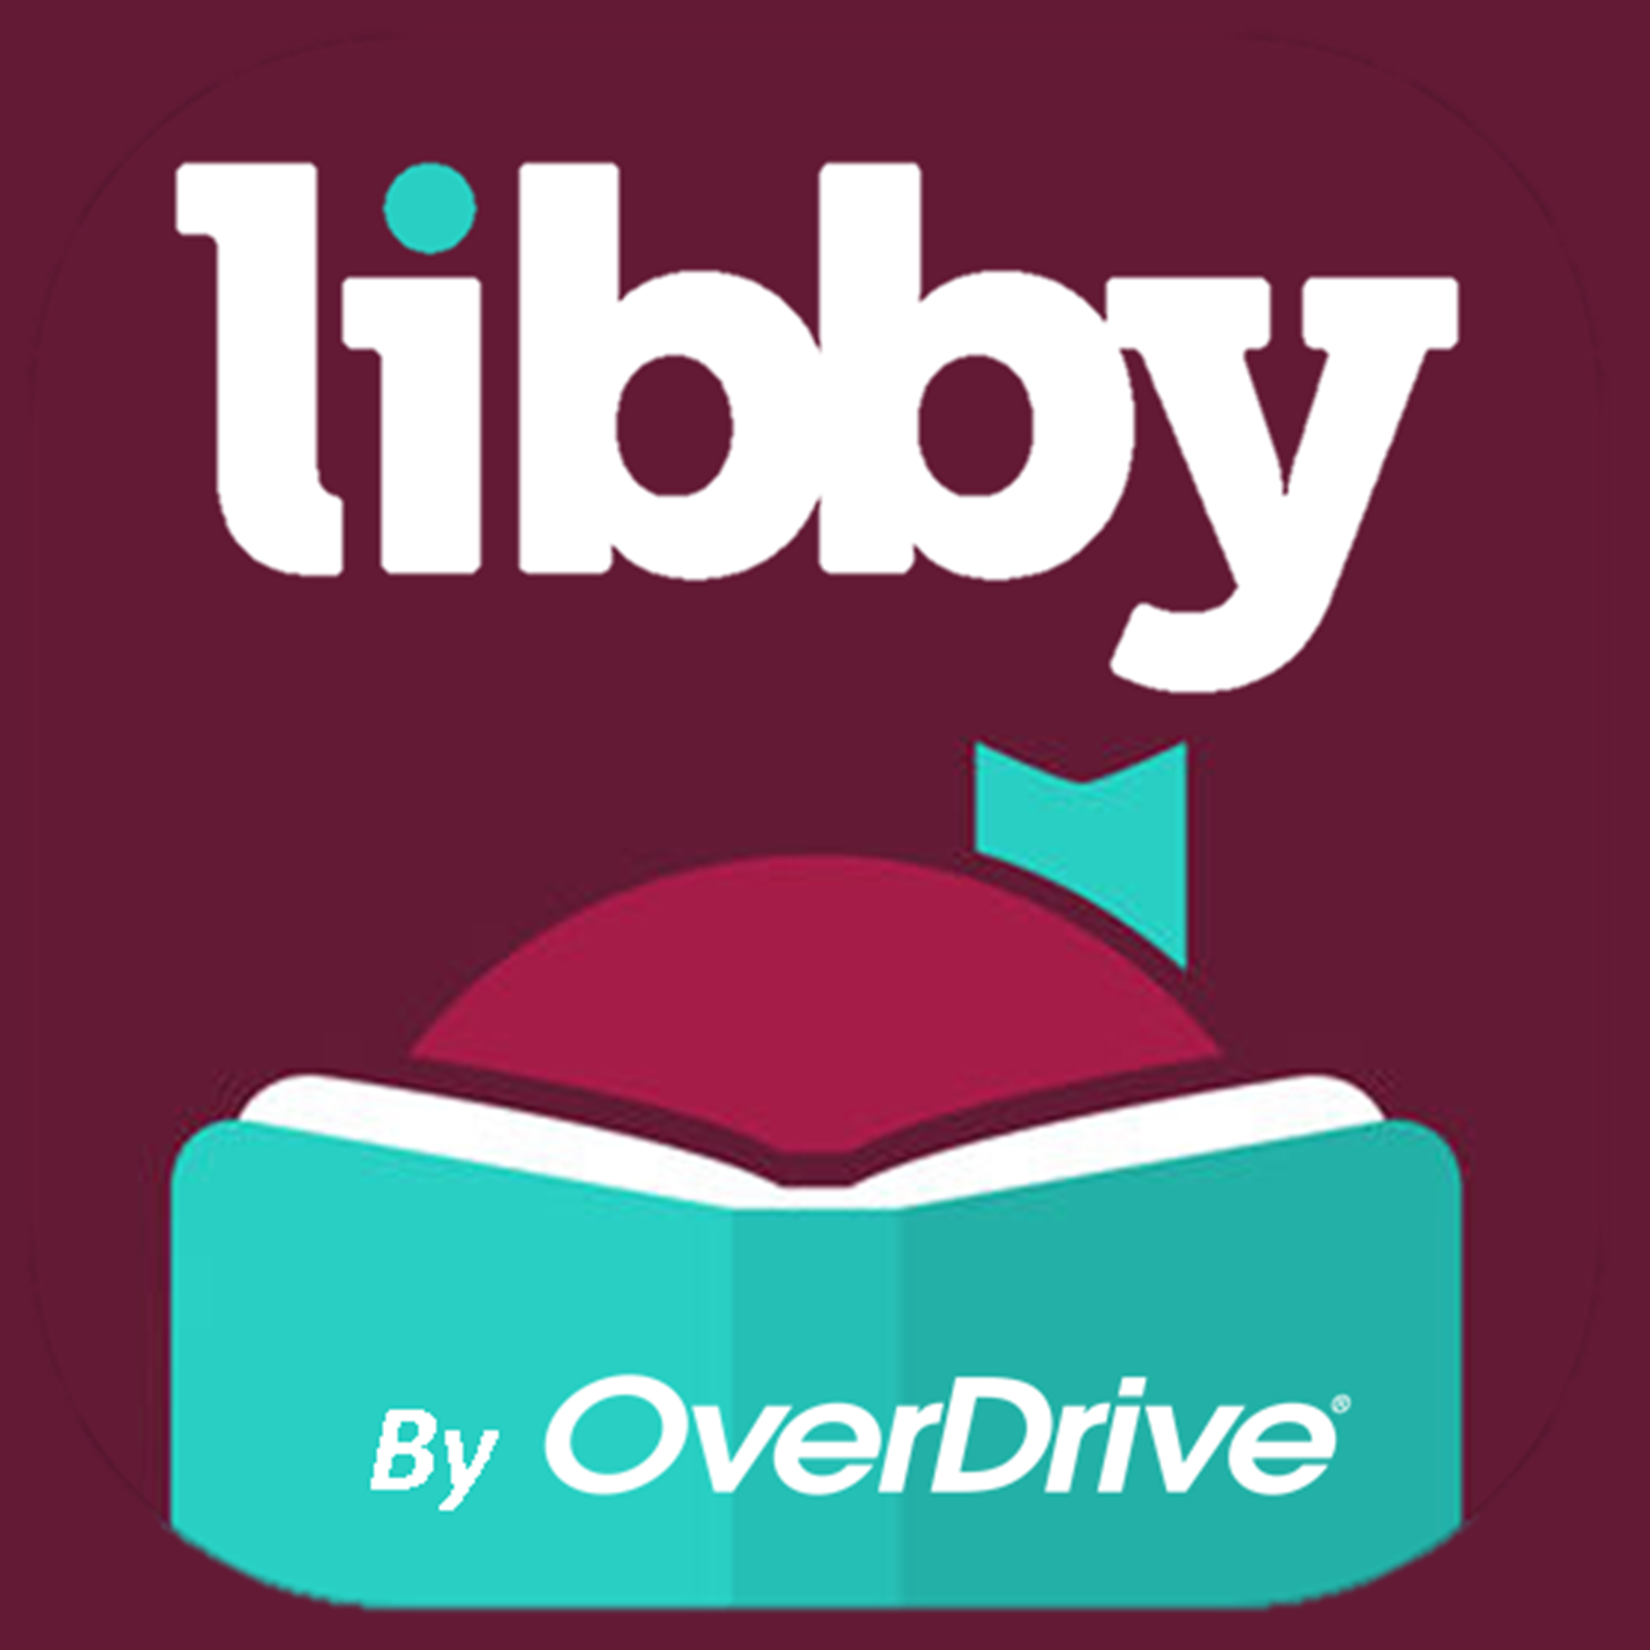 using libby on kindle